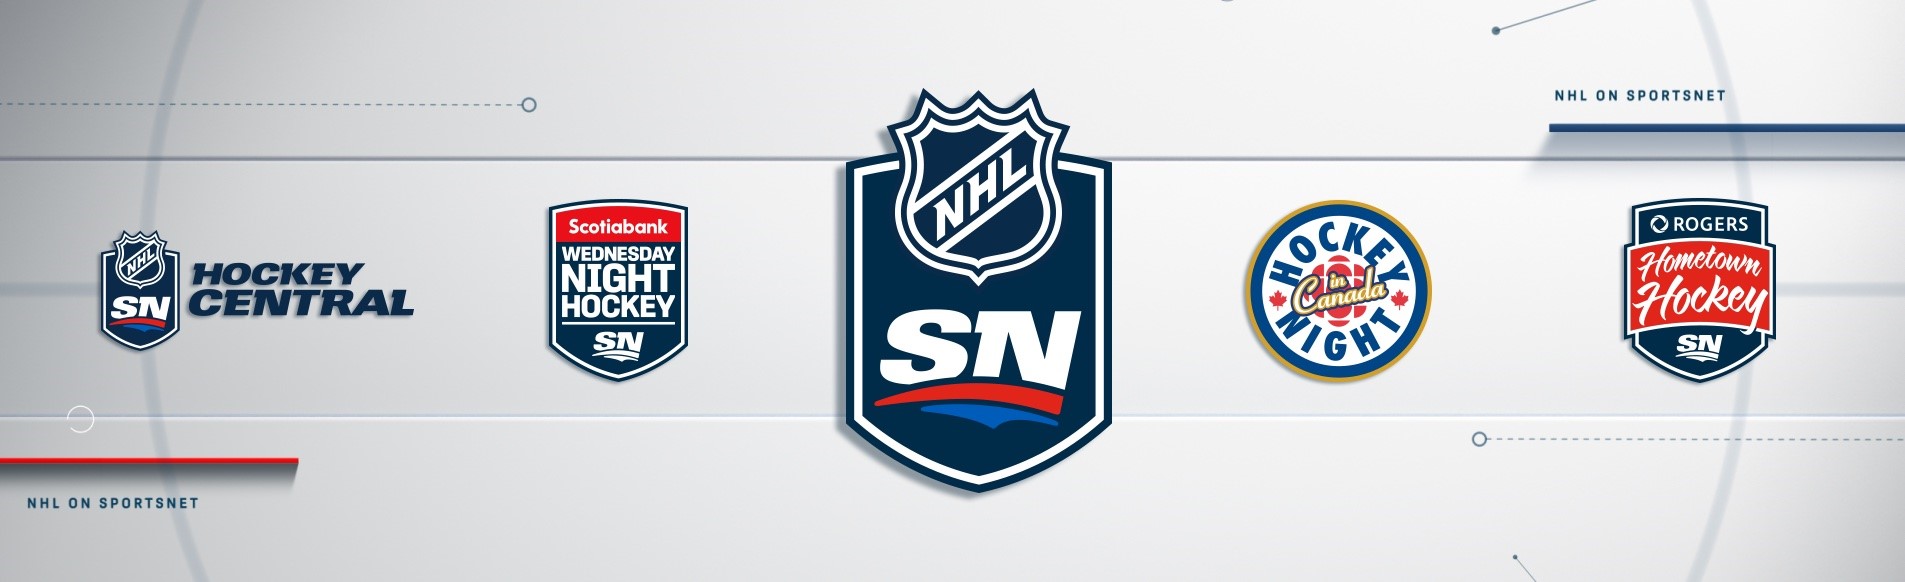 Sportsnet Announces 2021-22 National NHL Broadcast Schedule